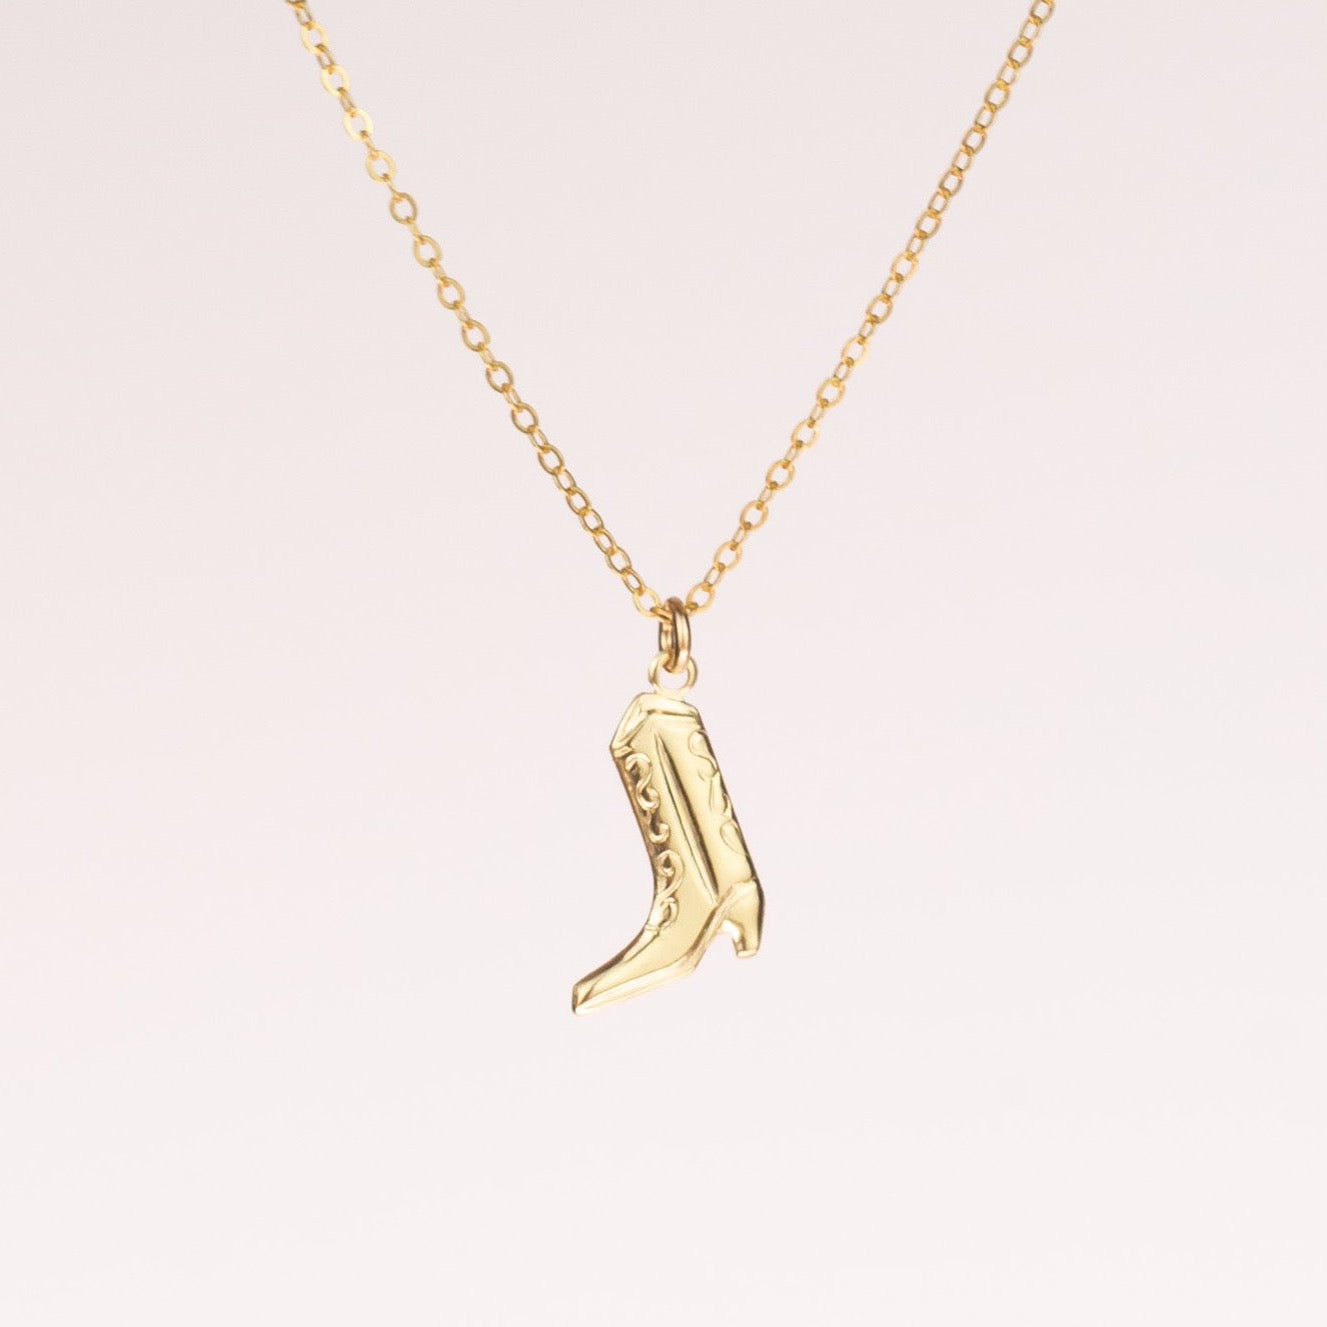 Every cowgirls' lucky charm 🍀 You will get so many compliments for this necklace honey. Charm and necklace made from 14k gold filled. | Cowboy Boot Necklace | Buy Fun Jewelry | HolaAmorEstudios | 